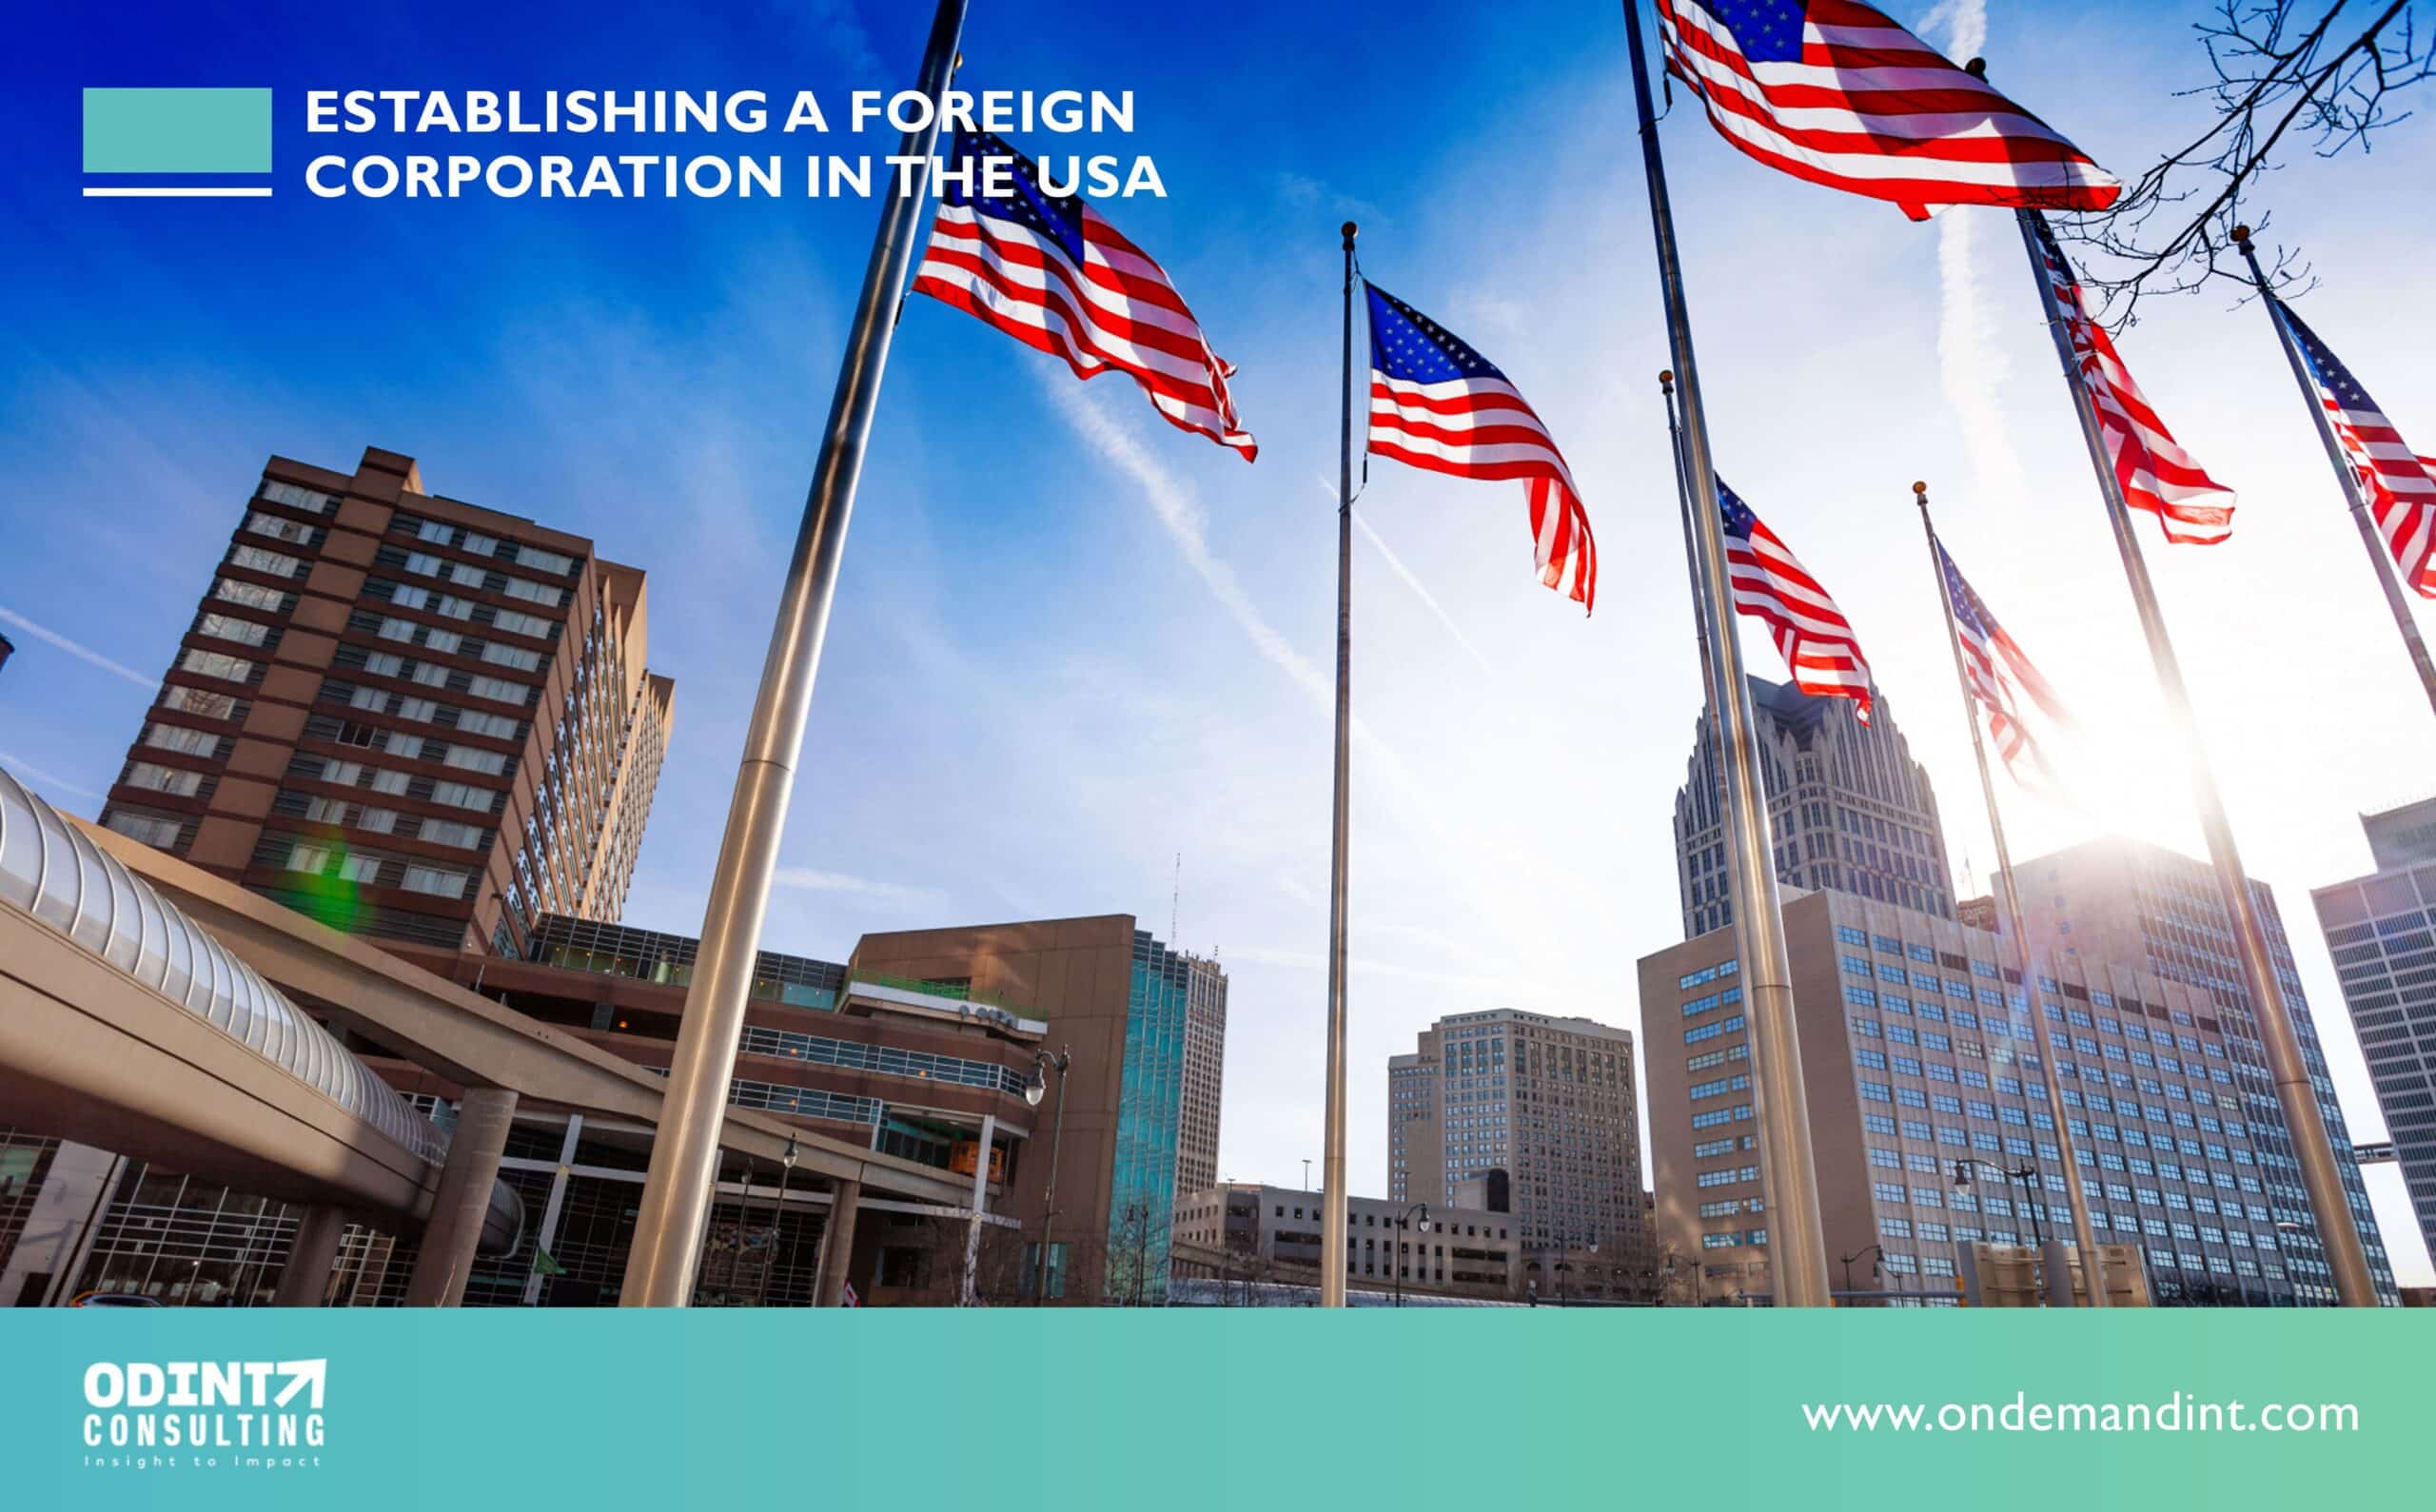 Establishing A Foreign Corporation In The USA: Procedure To Follow